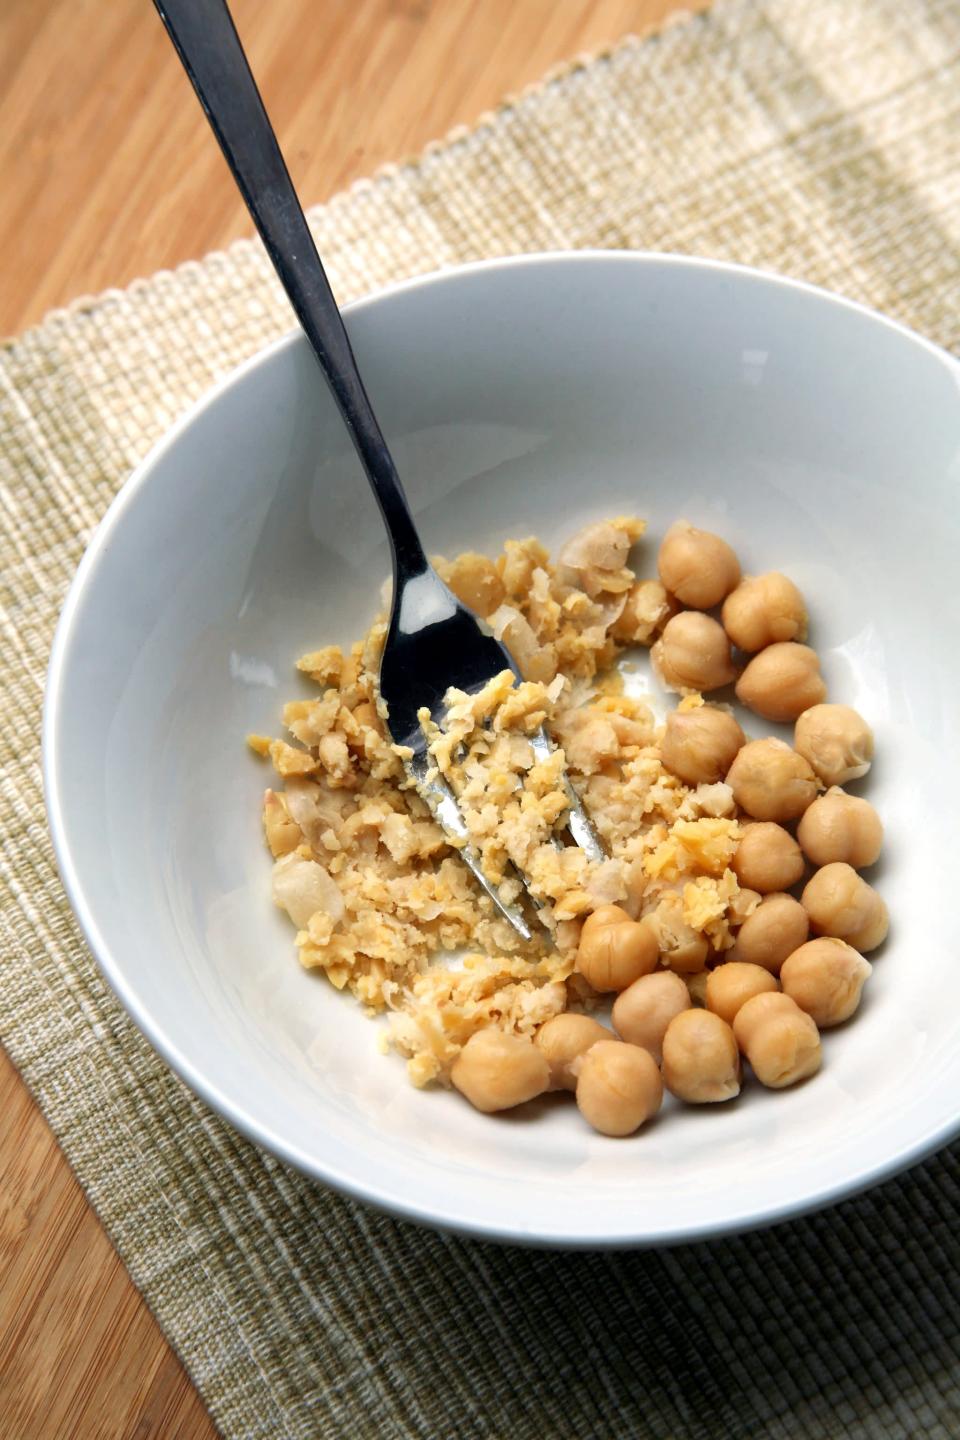 <p>Just <a href="https://www.popsugar.com/fitness/How-Add-More-Protein-Your-Oatmeal-40553263" class="link rapid-noclick-resp" rel="nofollow noopener" target="_blank" data-ylk="slk:mash one-quarter cup of garbanzo beans into your bowl">mash one-quarter cup of garbanzo beans into your bowl</a>. Then add the rolled oats, liquid, sweetener, and toppings of your choice, heat it up, and boom - for 65 extra calories, you get <a href="http://www.edenfoods.com/store/images/products/nlea/102960.gif" class="link rapid-noclick-resp" rel="nofollow noopener" target="_blank" data-ylk="slk:3.5 grams of protein">3.5 grams of protein</a> and 2.5 grams of fiber. </p> <p>The smashed chickpeas add a creaminess that blends right into the oatmeal, so you won't notice them one bit. This hack works with white beans, too, and if your oatmeal is chocolate flavored, you can use black beans.</p> <p><strong>Try this recipe:</strong> <a href="https://www.popsugar.com/fitness/Banana-Cashew-Overnight-Oats-40463726" class="link rapid-noclick-resp" rel="nofollow noopener" target="_blank" data-ylk="slk:banana cashew overnight oats">banana cashew overnight oats</a></p>